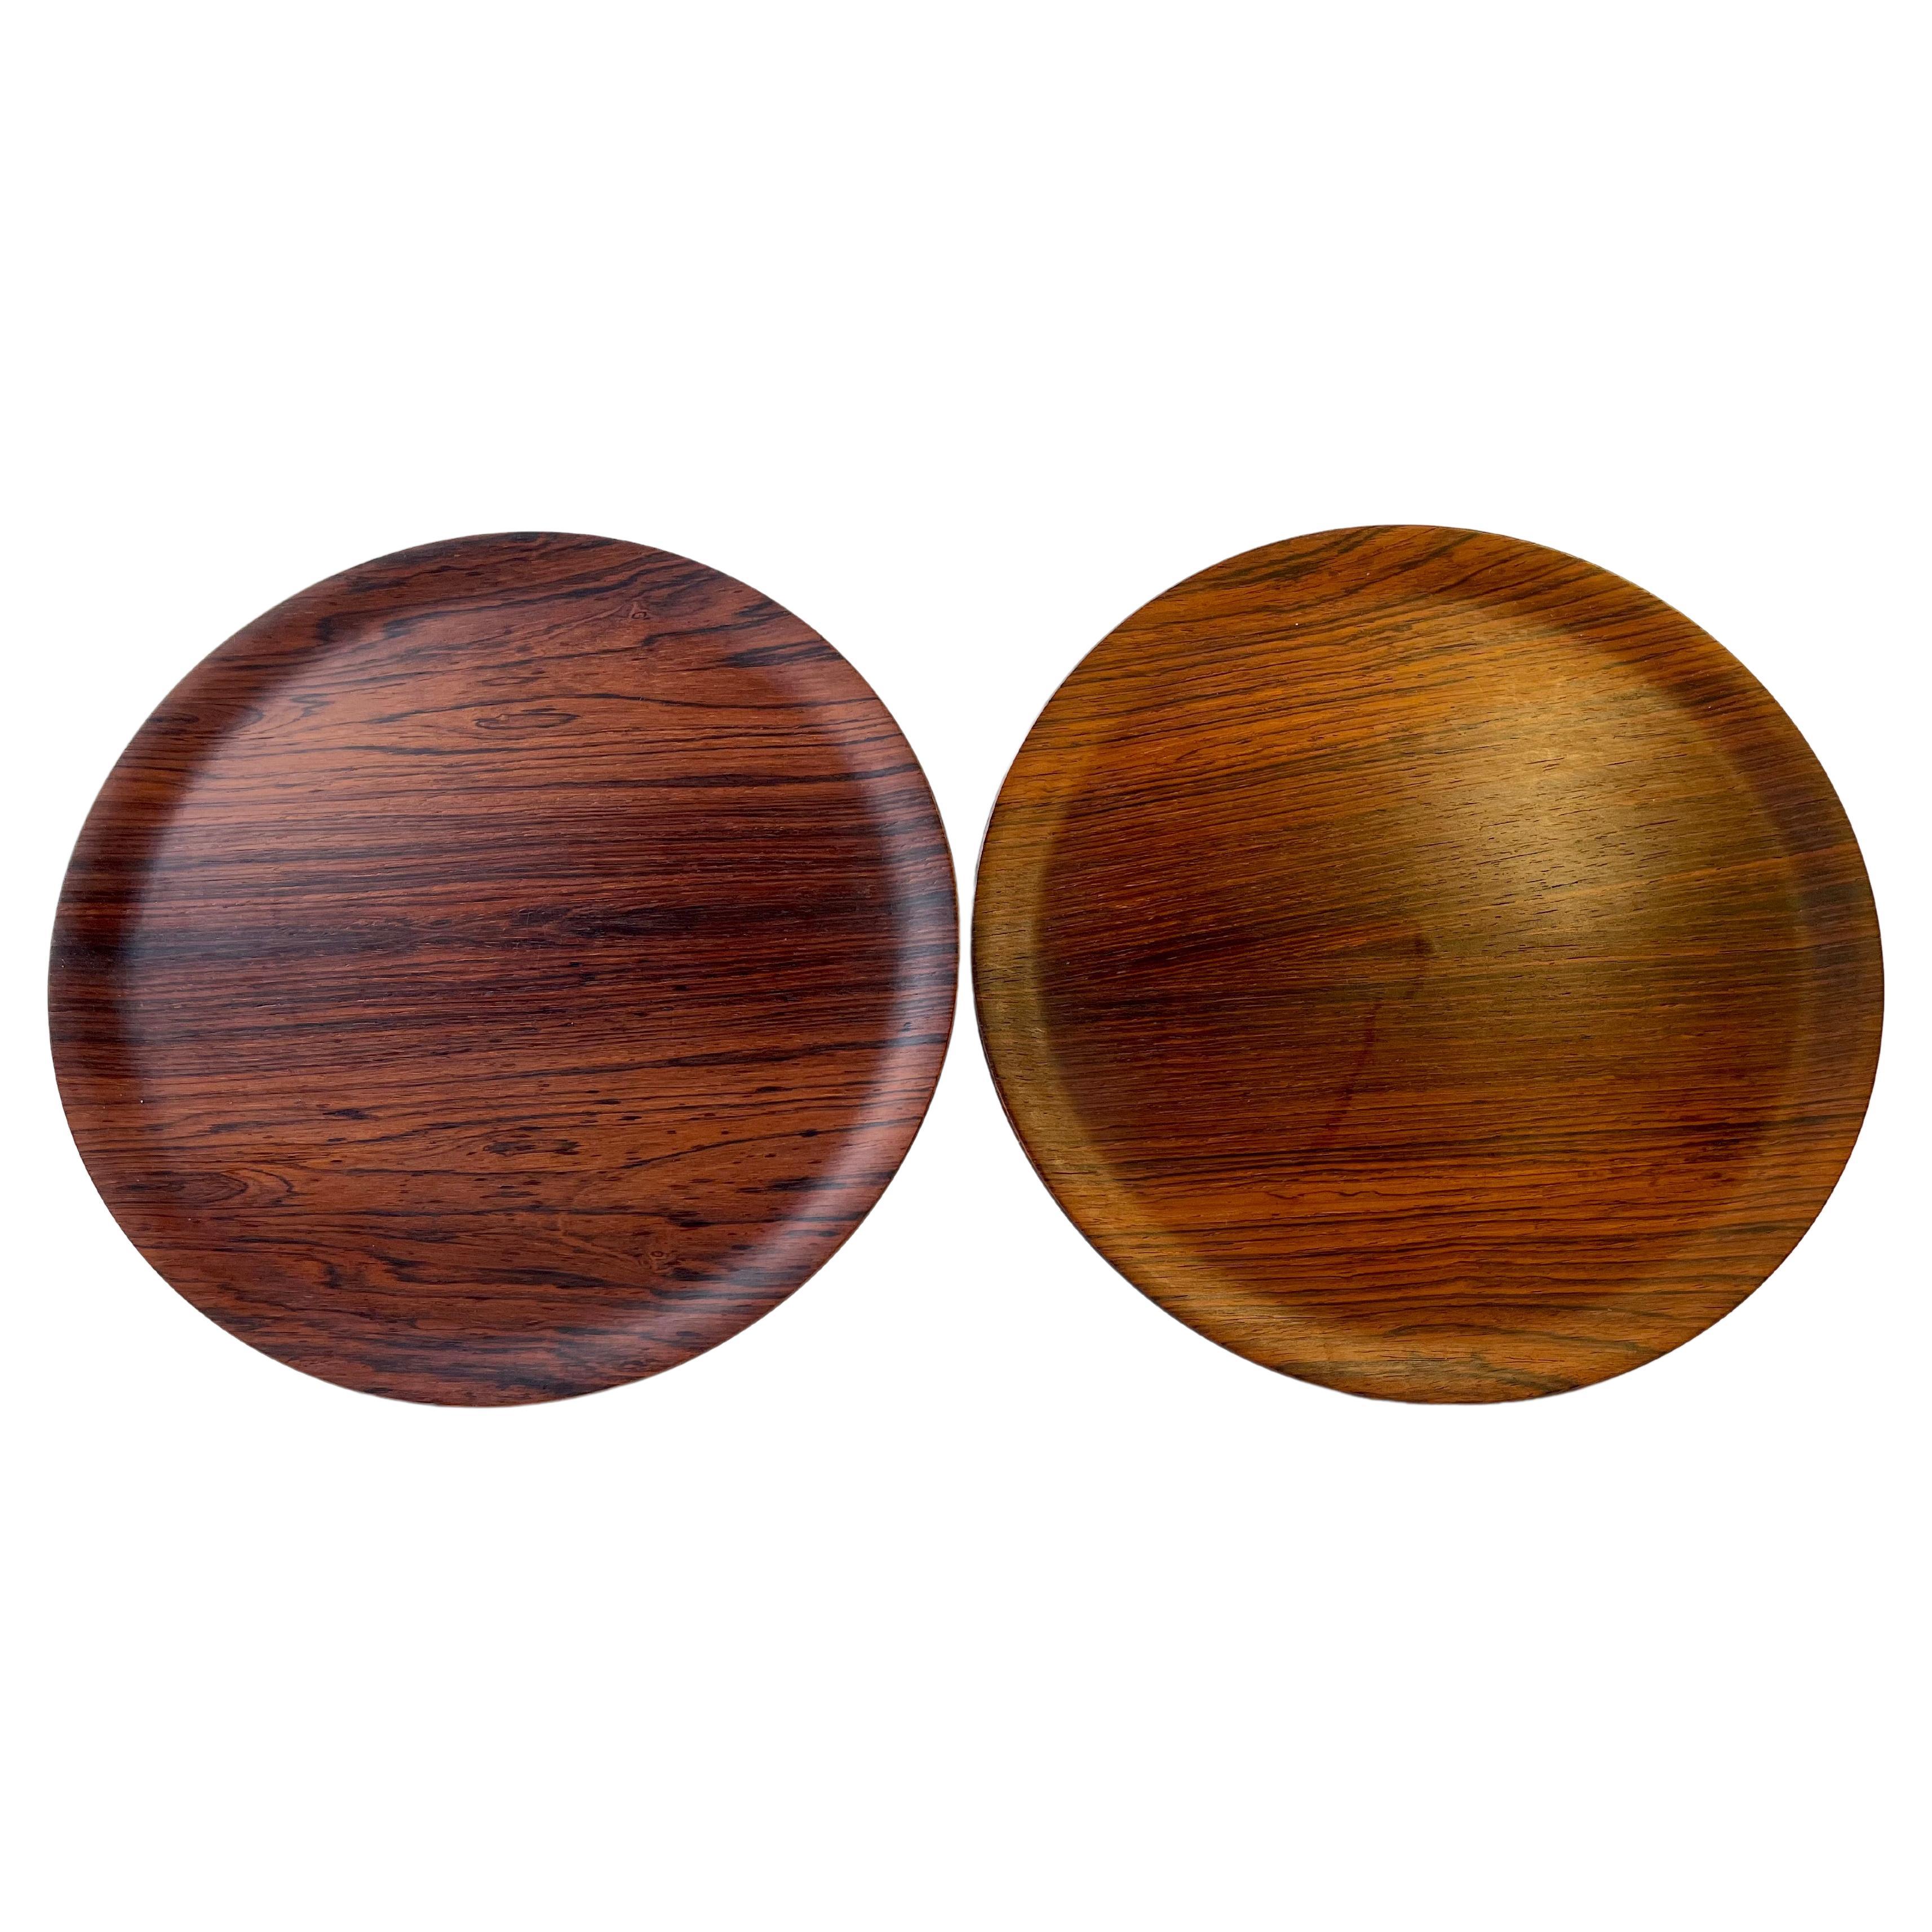 A pair of 29 cm round serving trays in molded rosewood veneer. Made in Scandinavia during the 1960s, probably by Åry Denmark and in a style reminiscent of Uno & Osten Kristiansson. Please notice that these are made from East Indian type rosewood